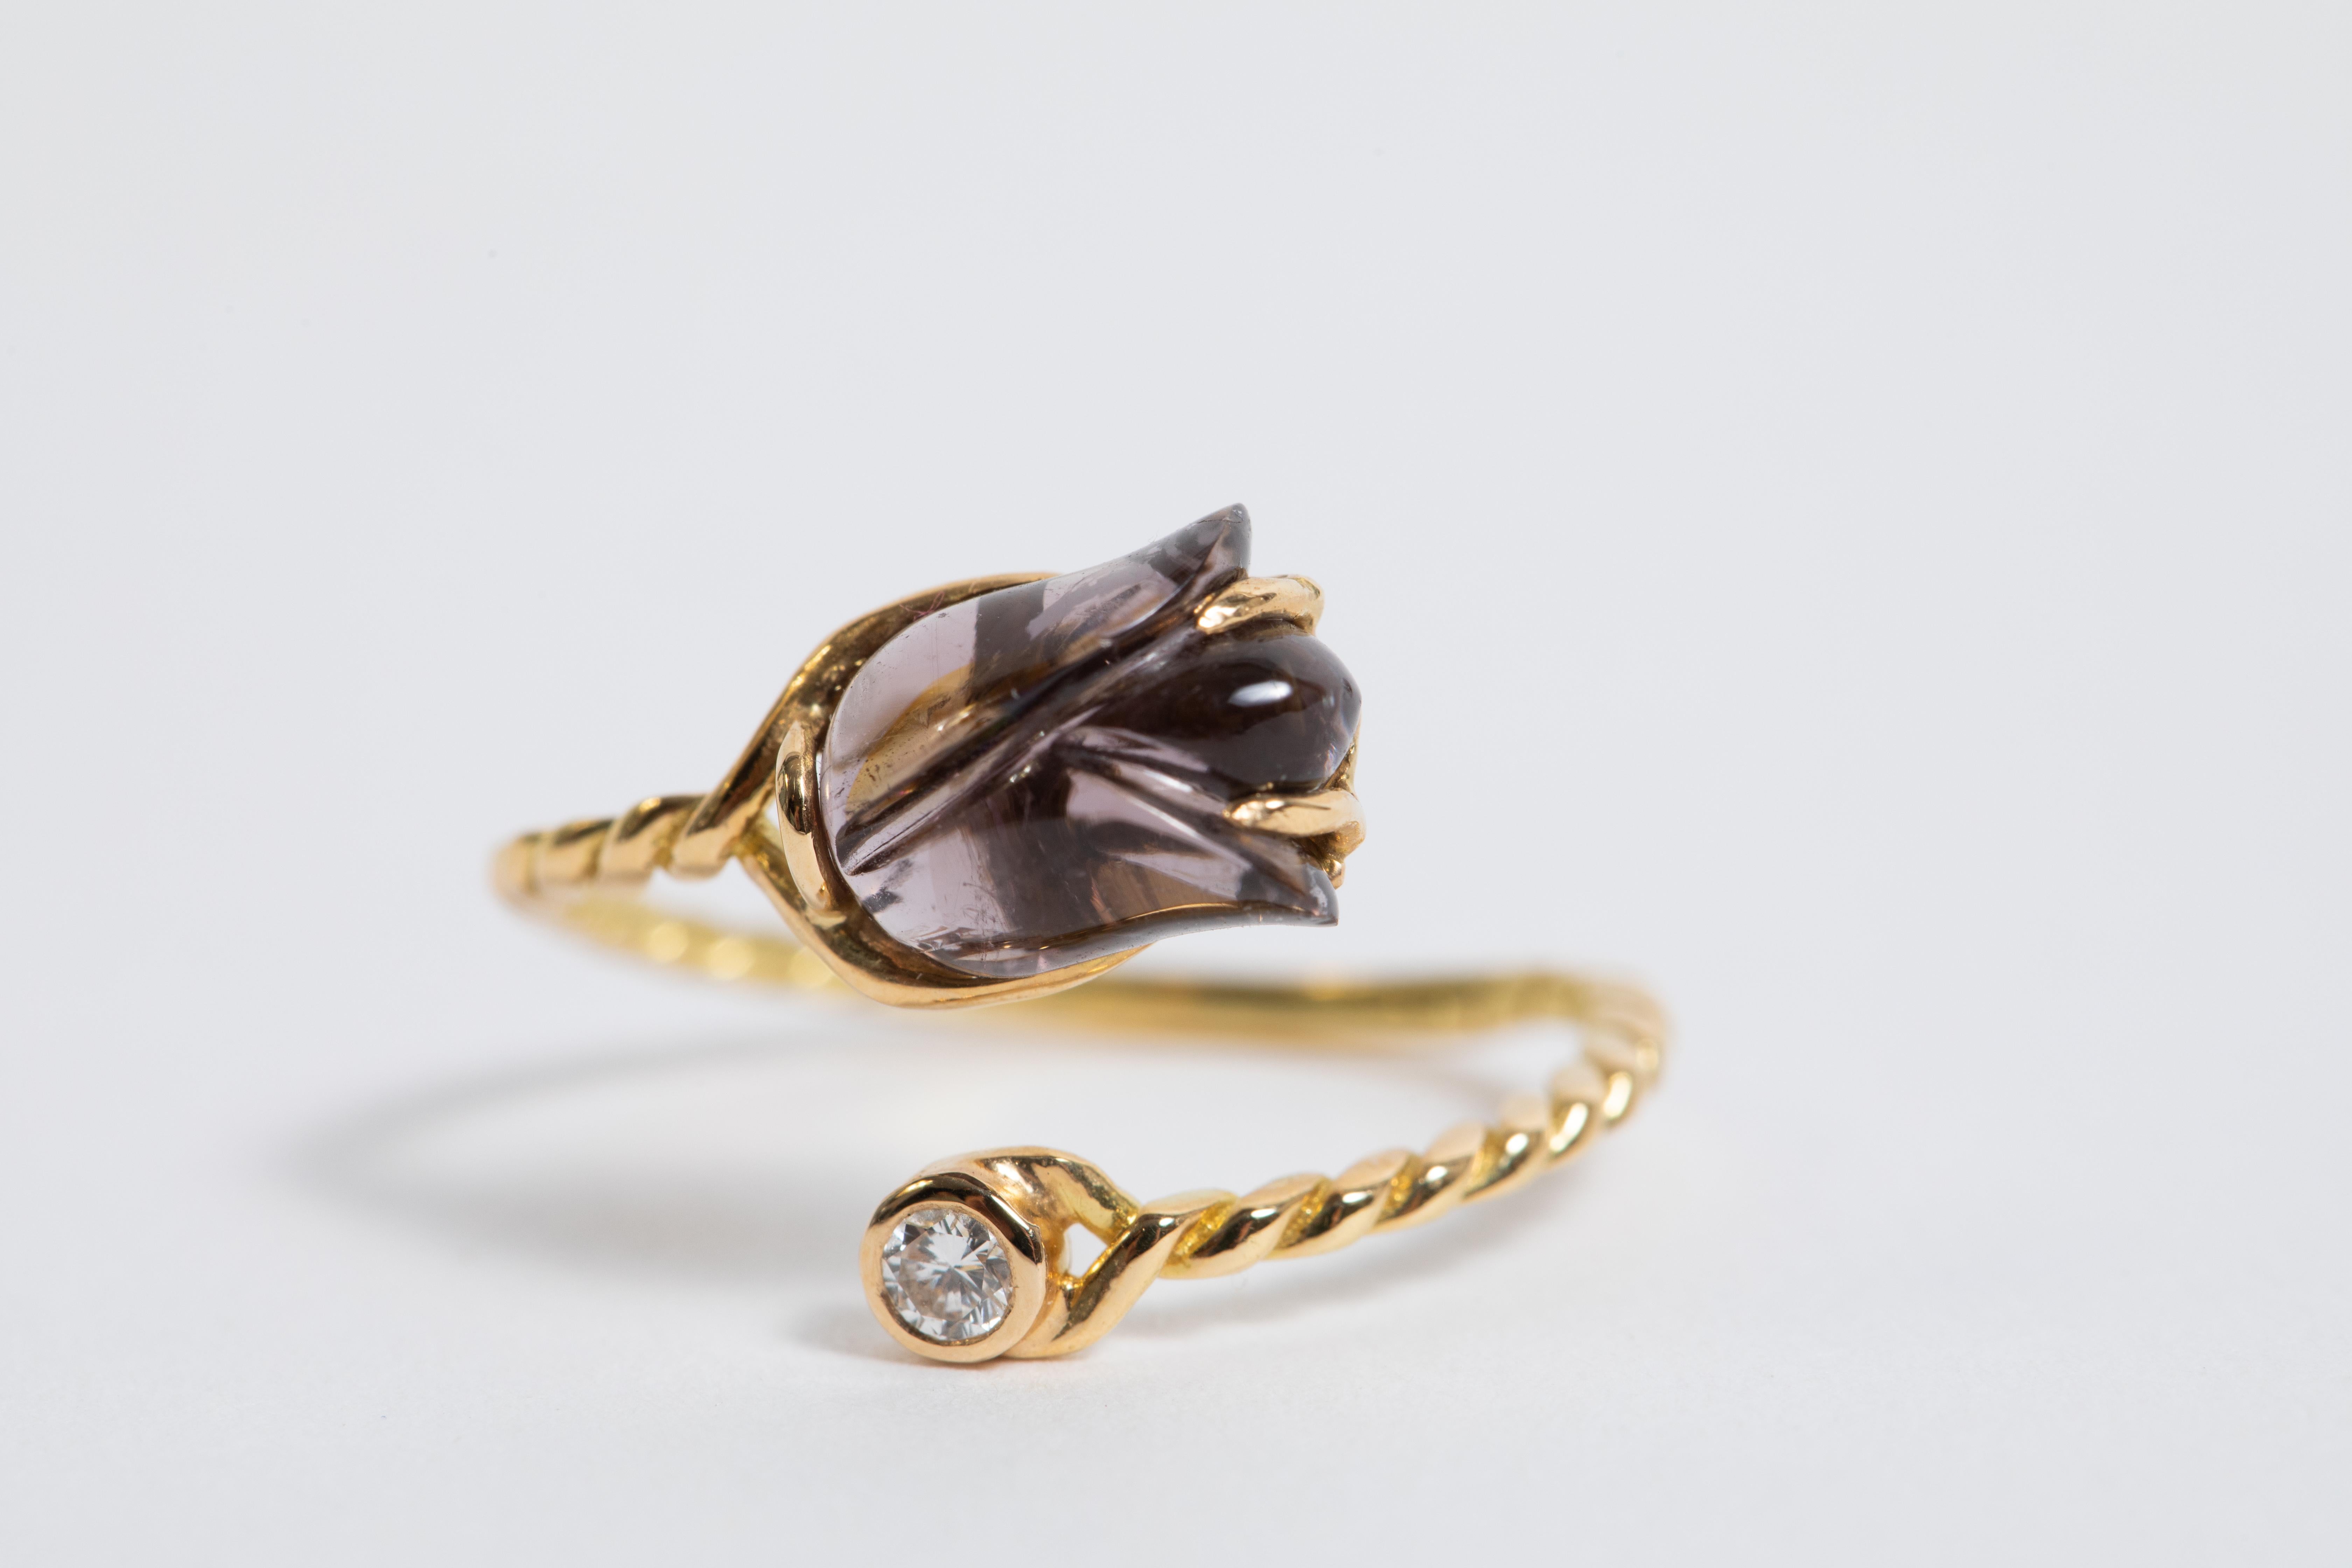 You and Me ring in 18k yellow gold set with a delicate purple tourmaline flower and a diamond.
A charming ring easy to wear and very confortable, created by Marion Jeantet
Unique piece, Size 6 - Can be adjusted to your size
French assay mark.
Price